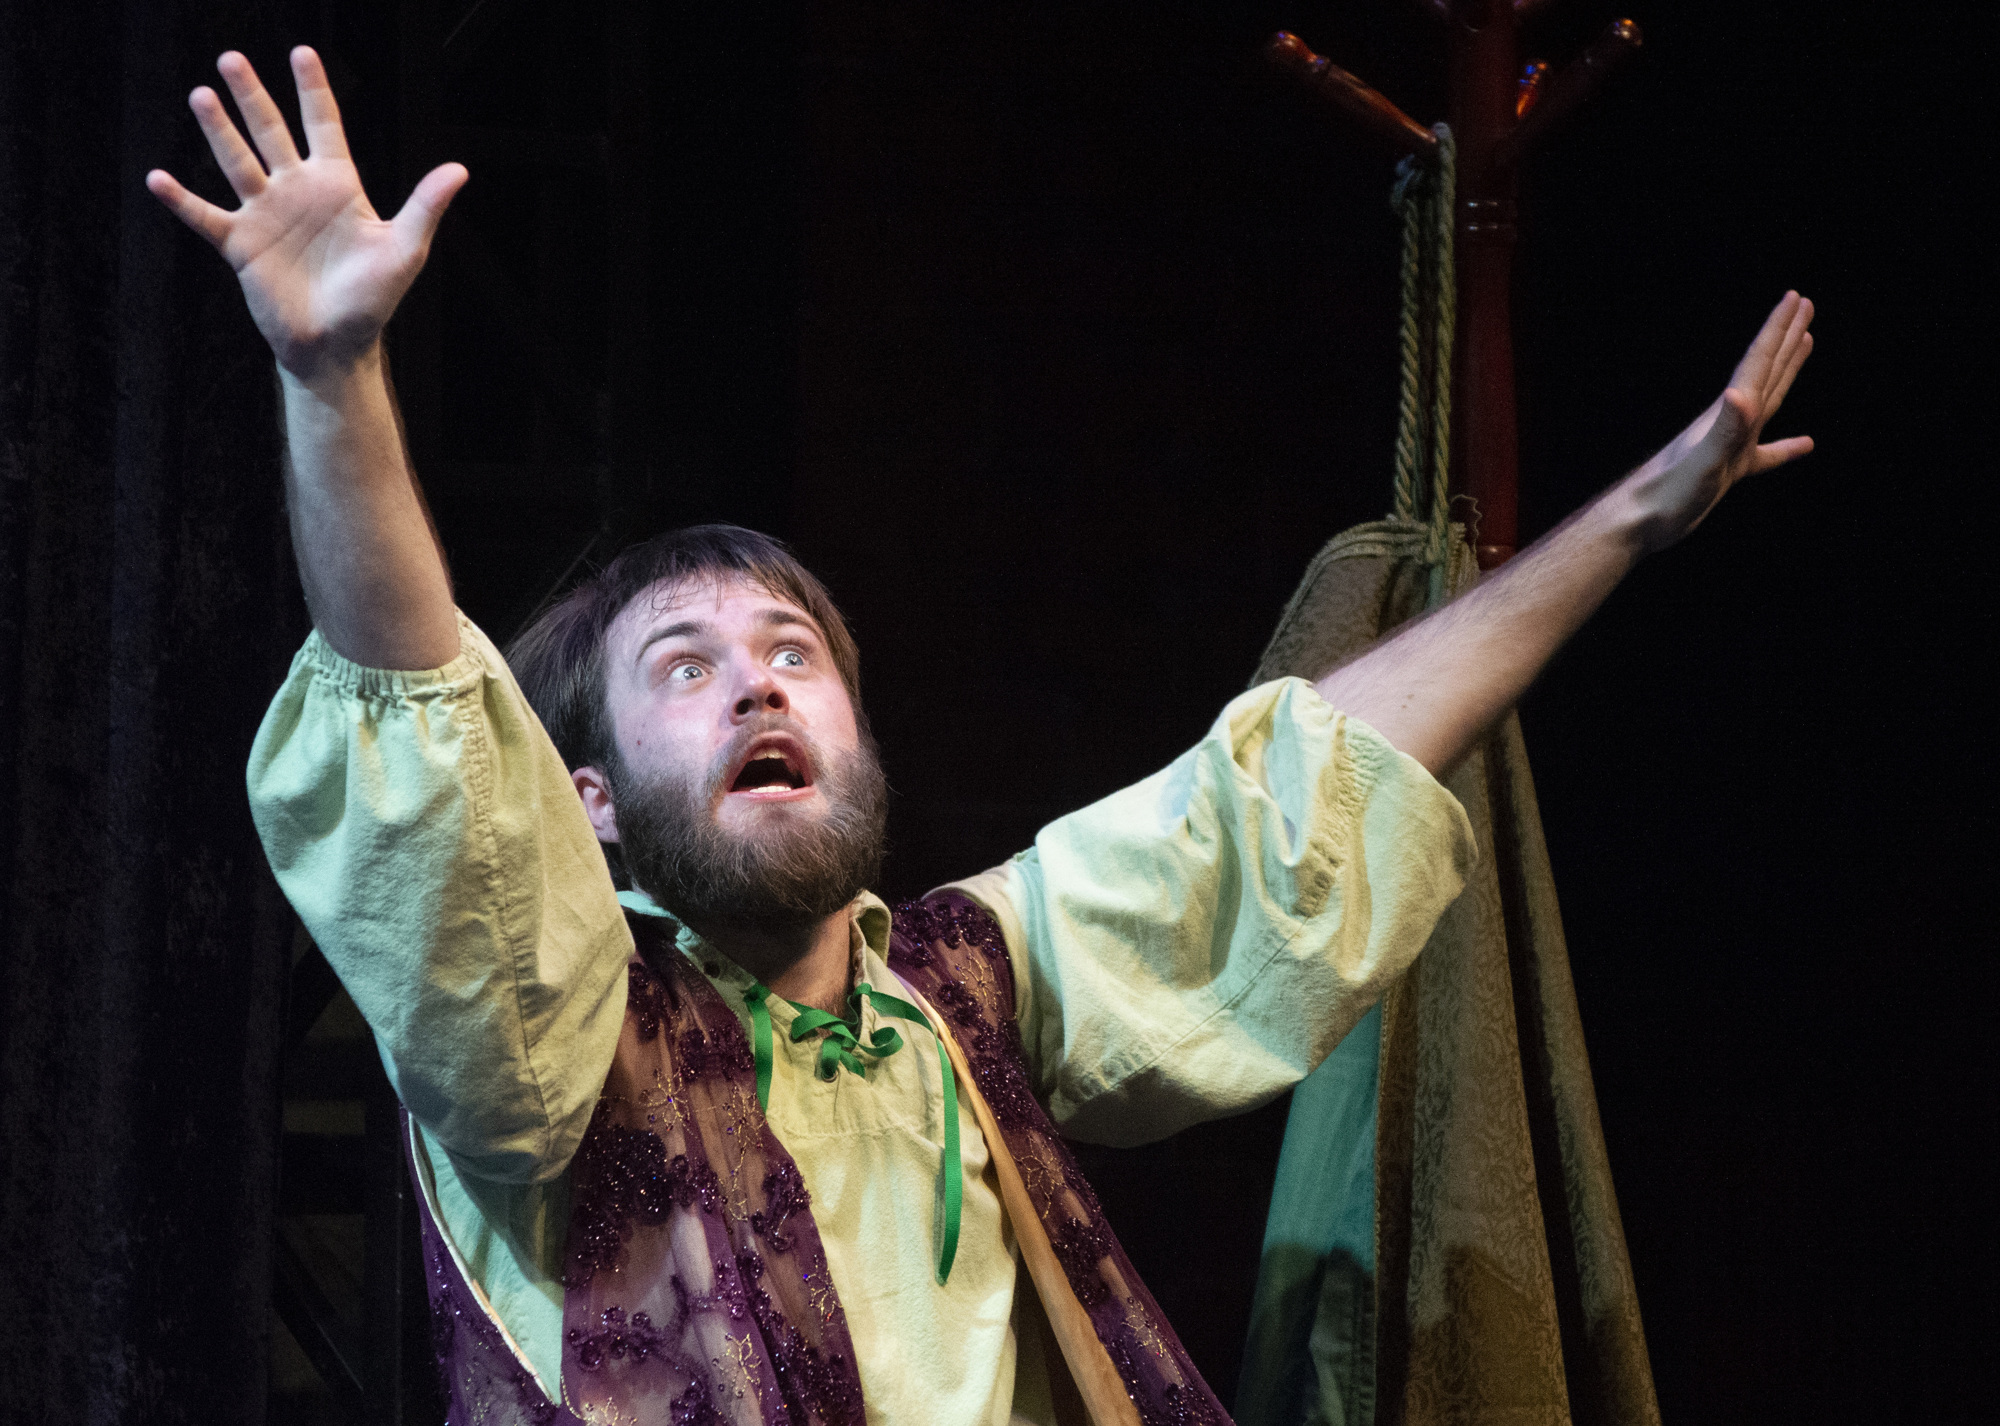 Past roles of Liam Tanner's include Pericles in 